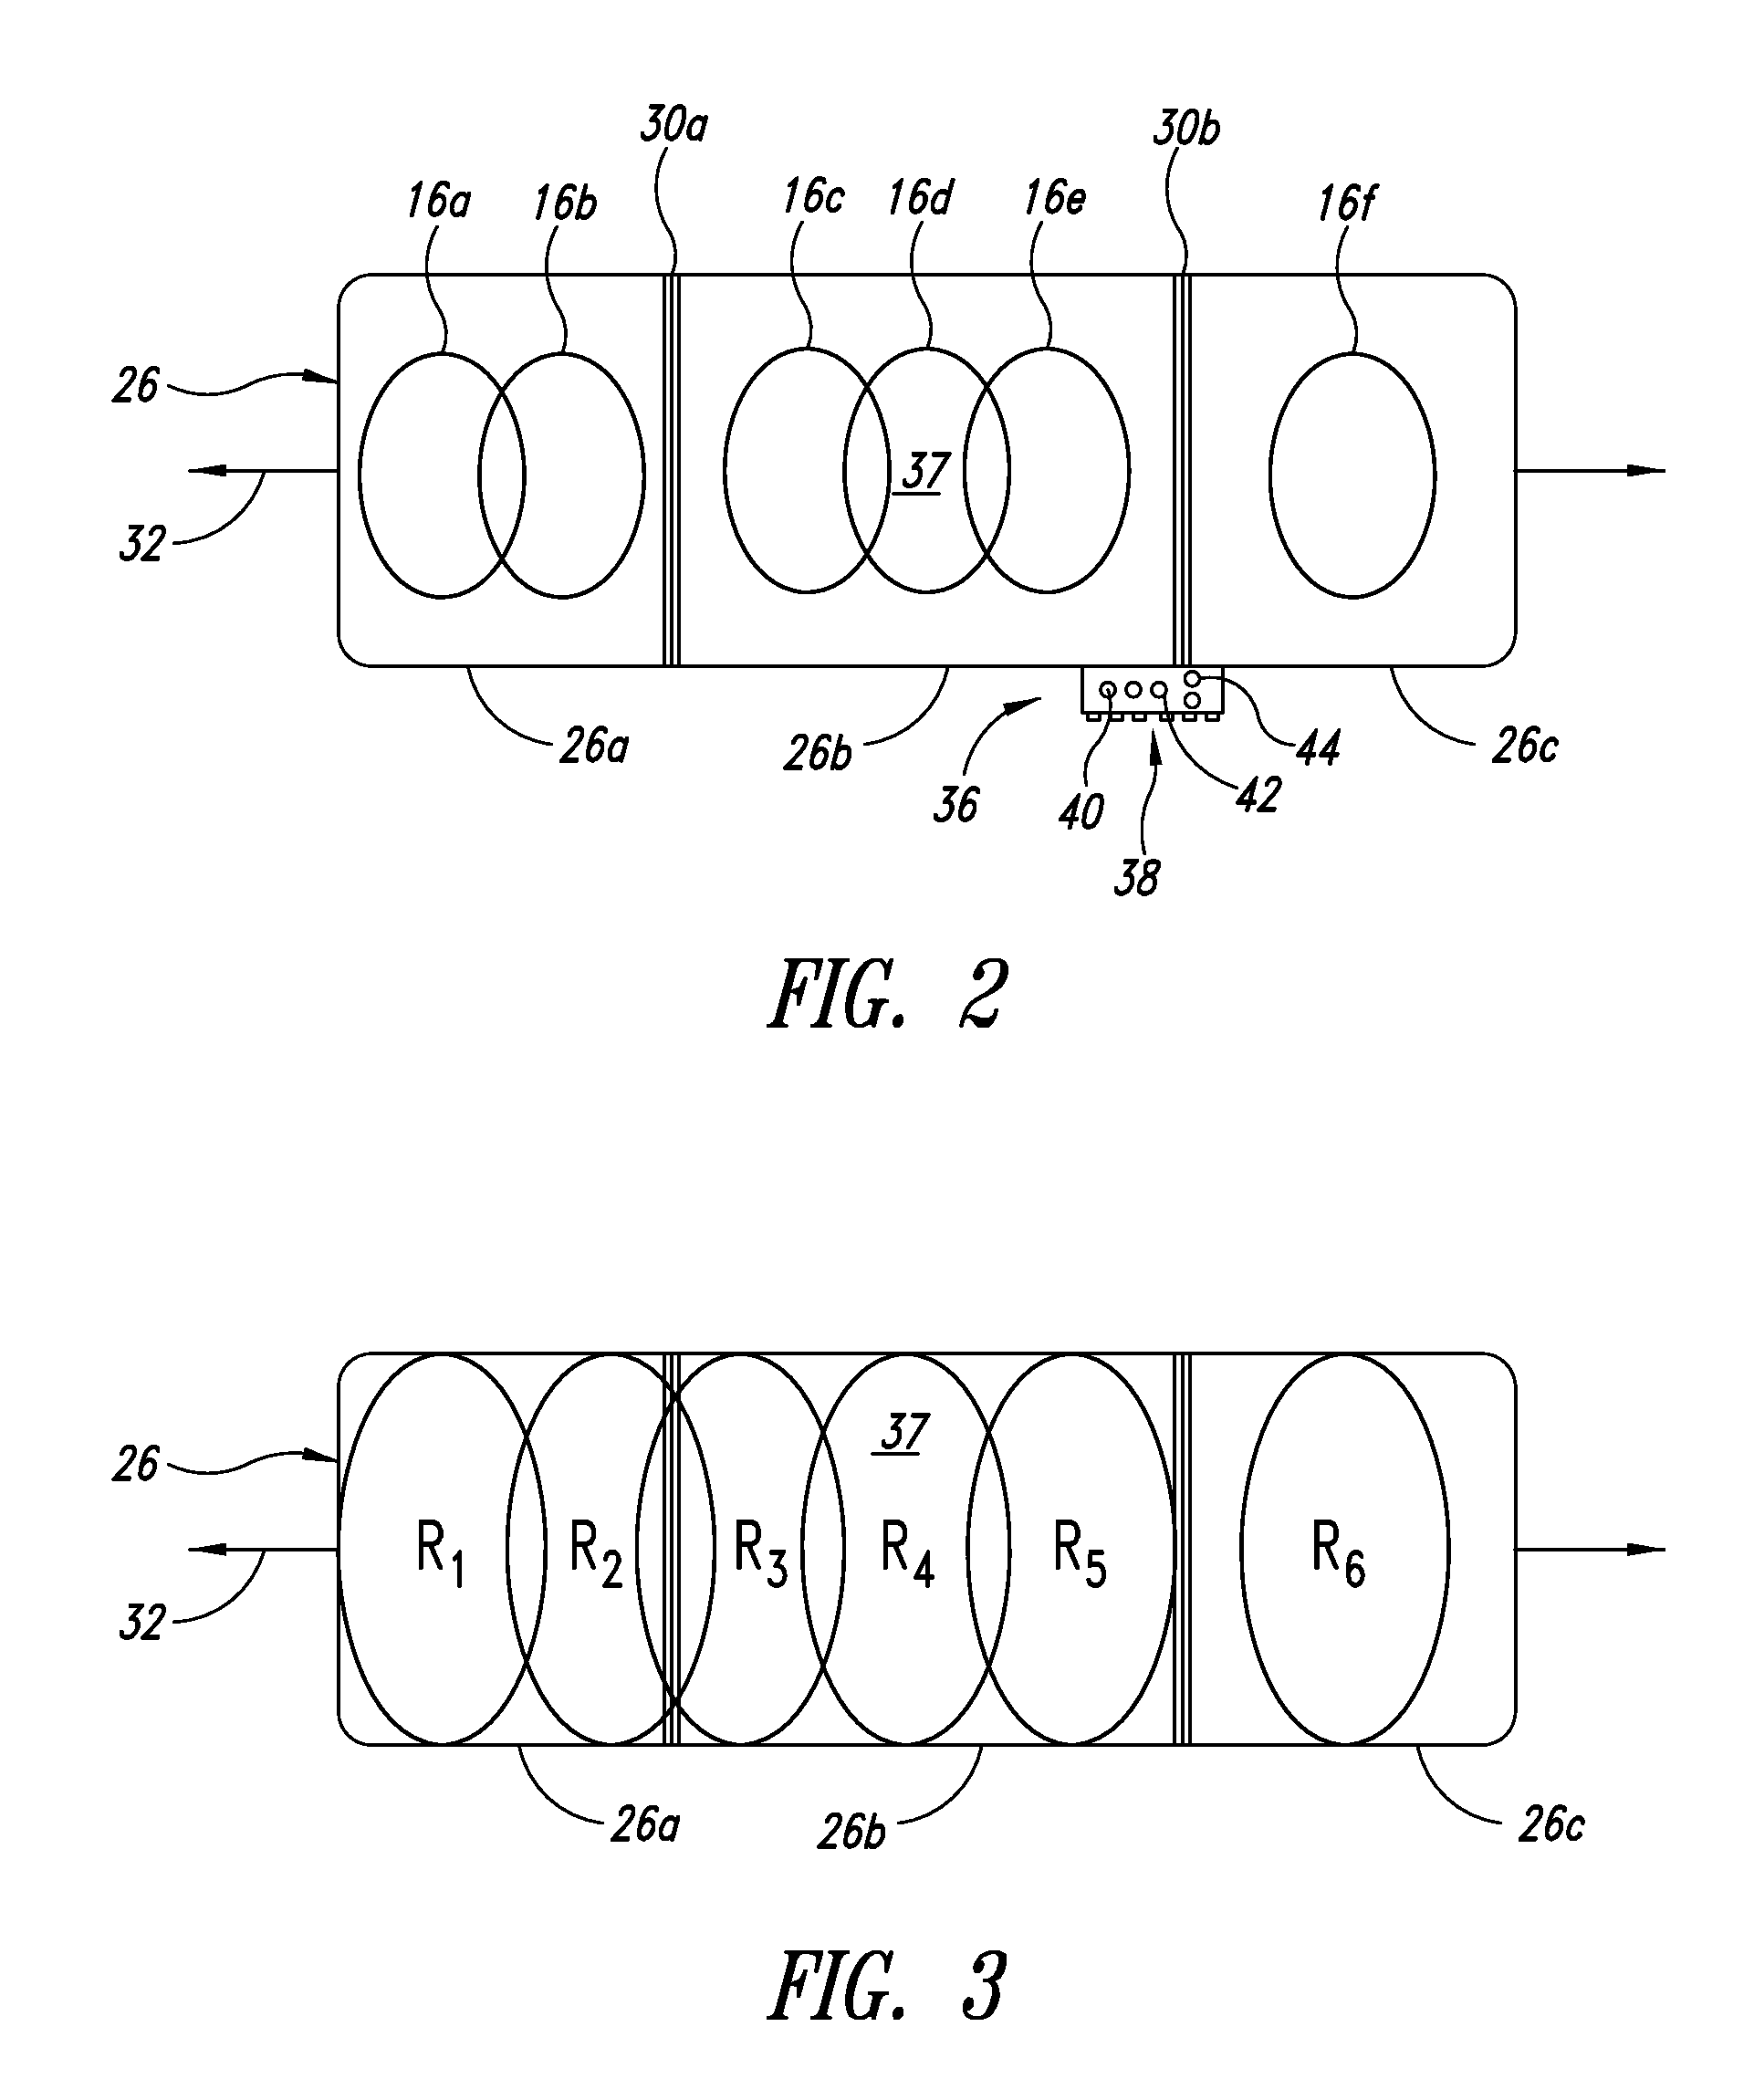 Method and apparatus to detect transponder tagged objects and to communicate with medical telemetry devices, for example during medical procedures